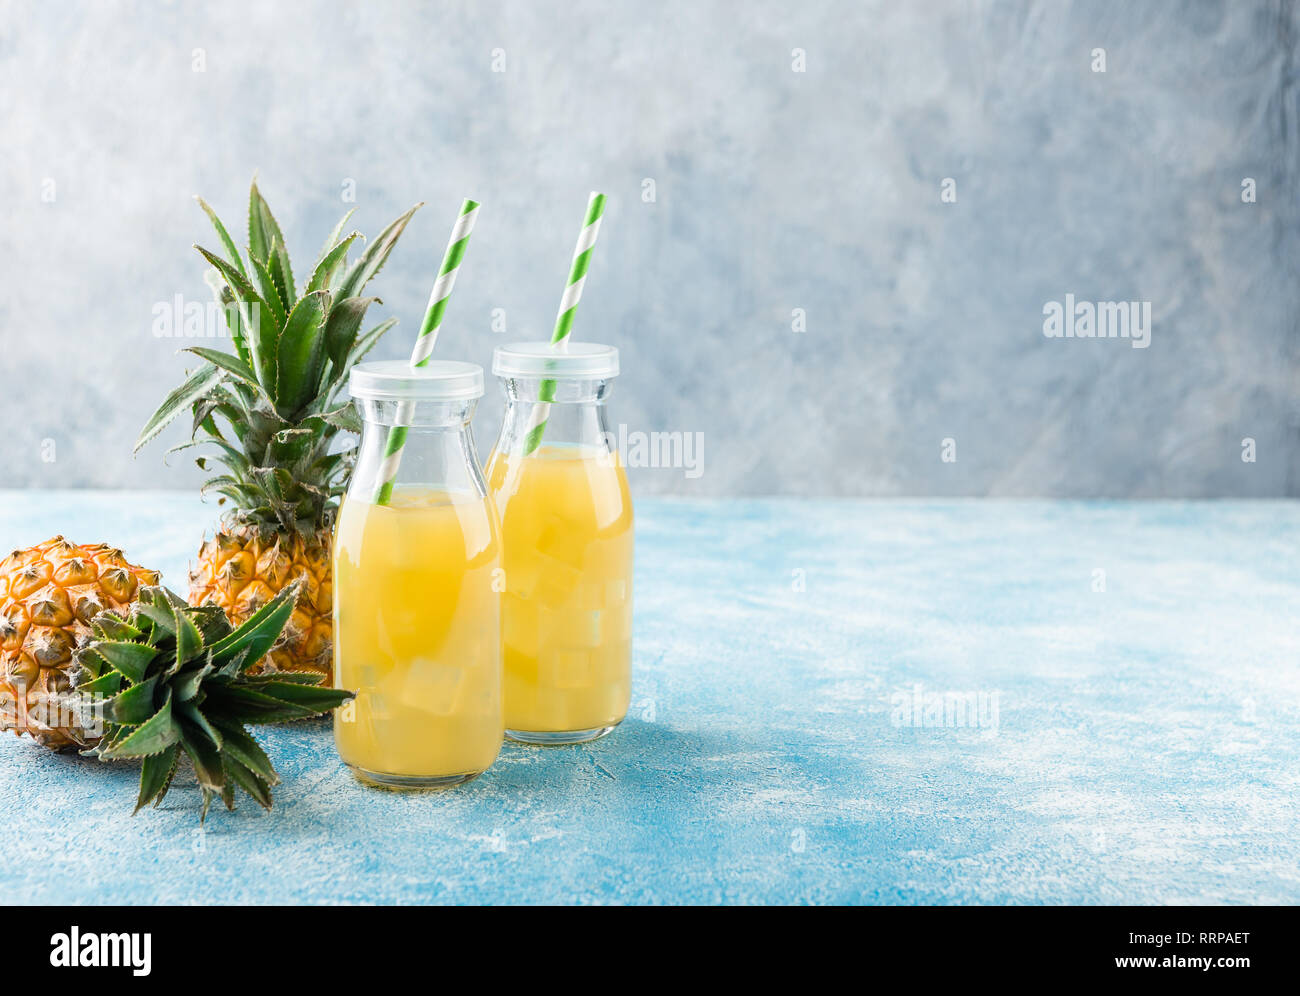 Pineapple cocktail or juice in two glass bottles with straws with ice and two mini pineapples on a blue background Stock Photo